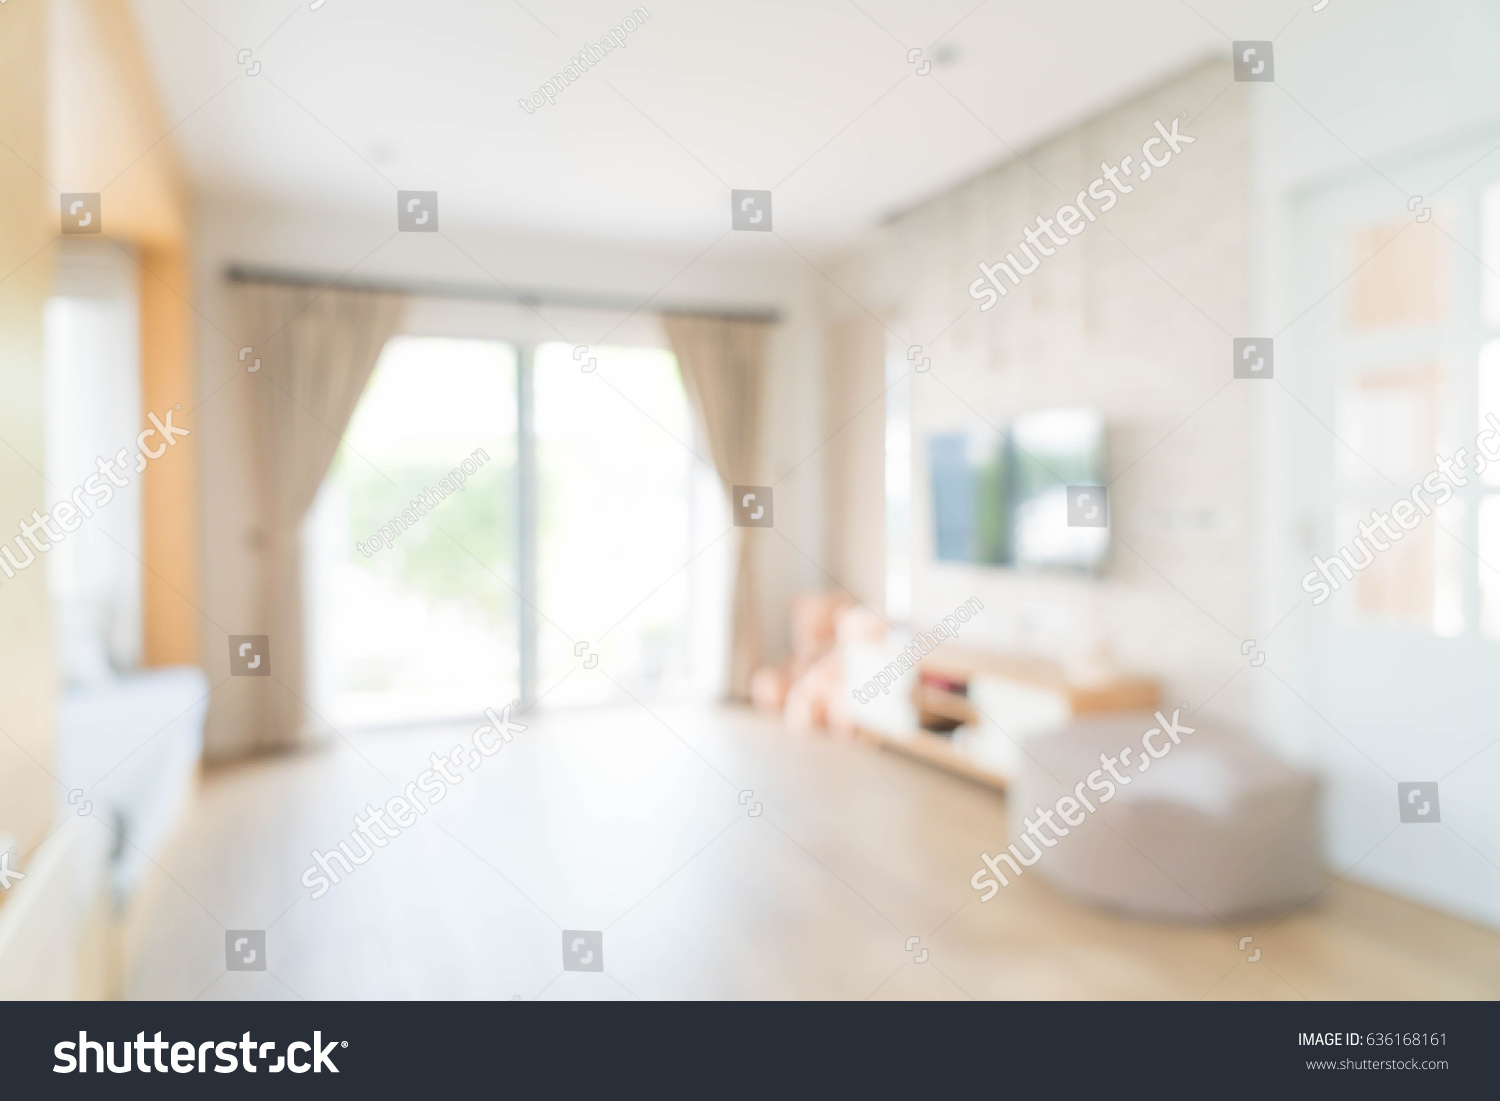 abstract blur curtain interior decoration in living room with sunlight #636168161